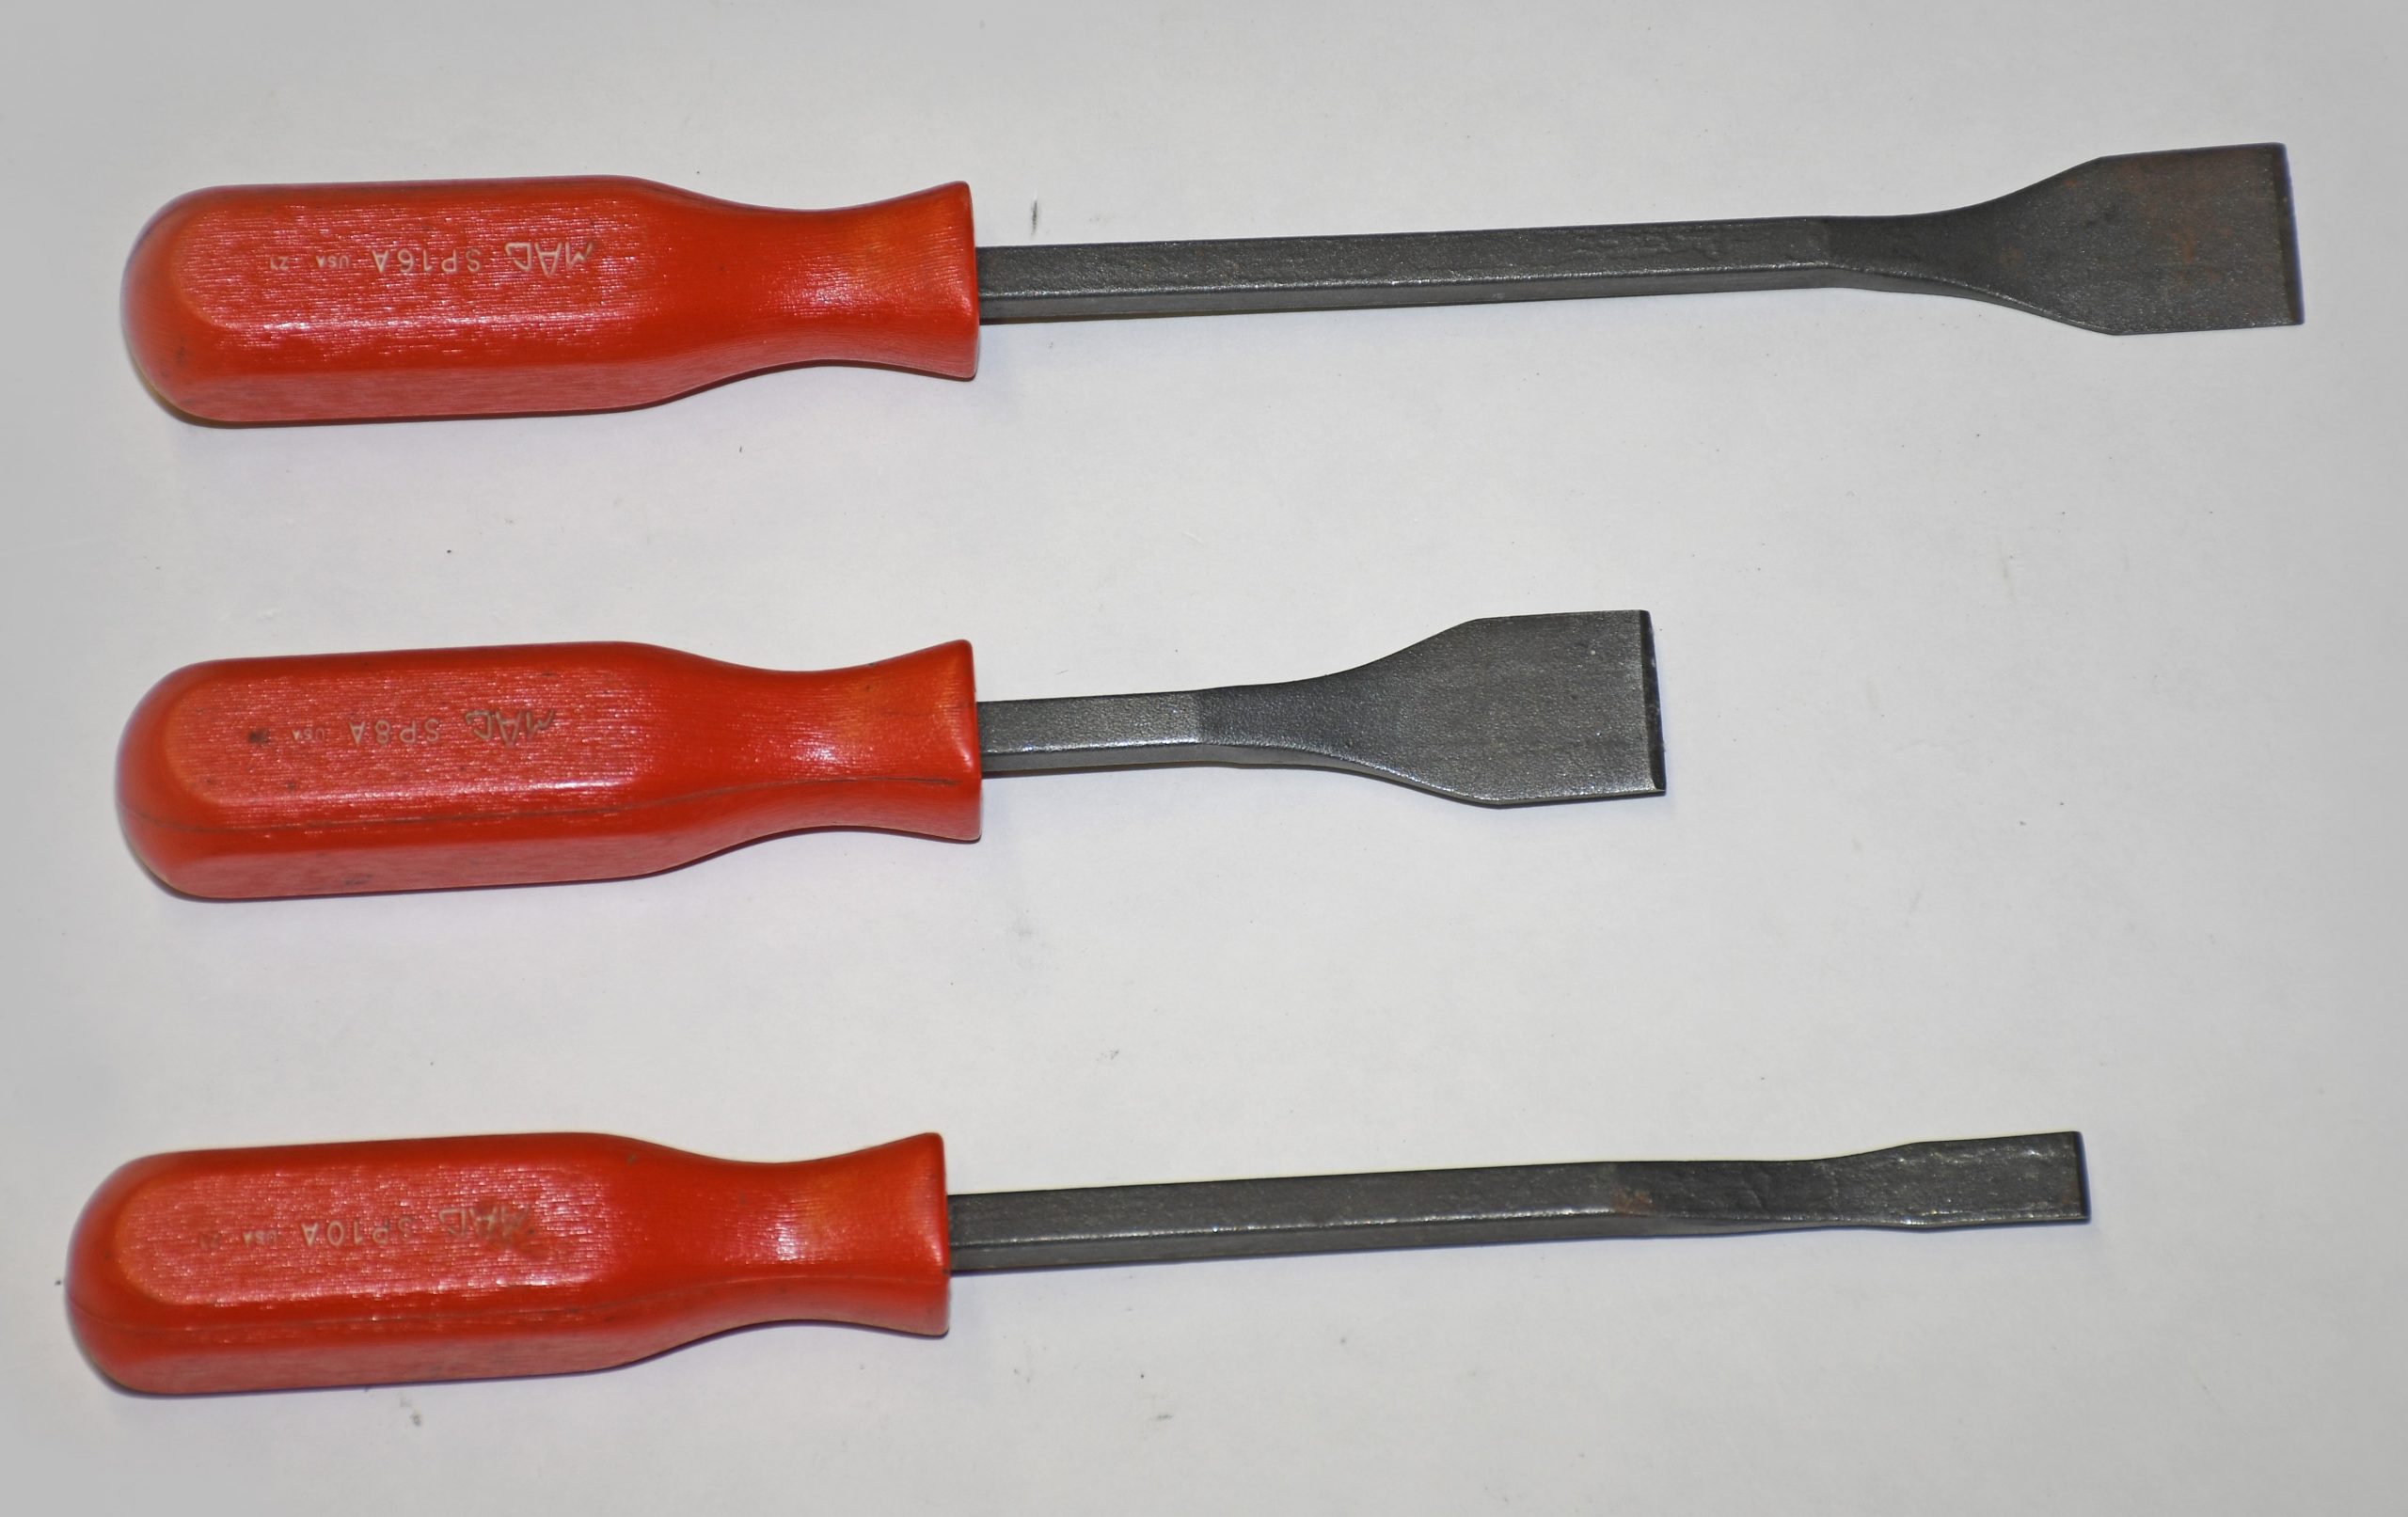 Gasket Scraping Tools: Taking Drudgery Out of the Equation